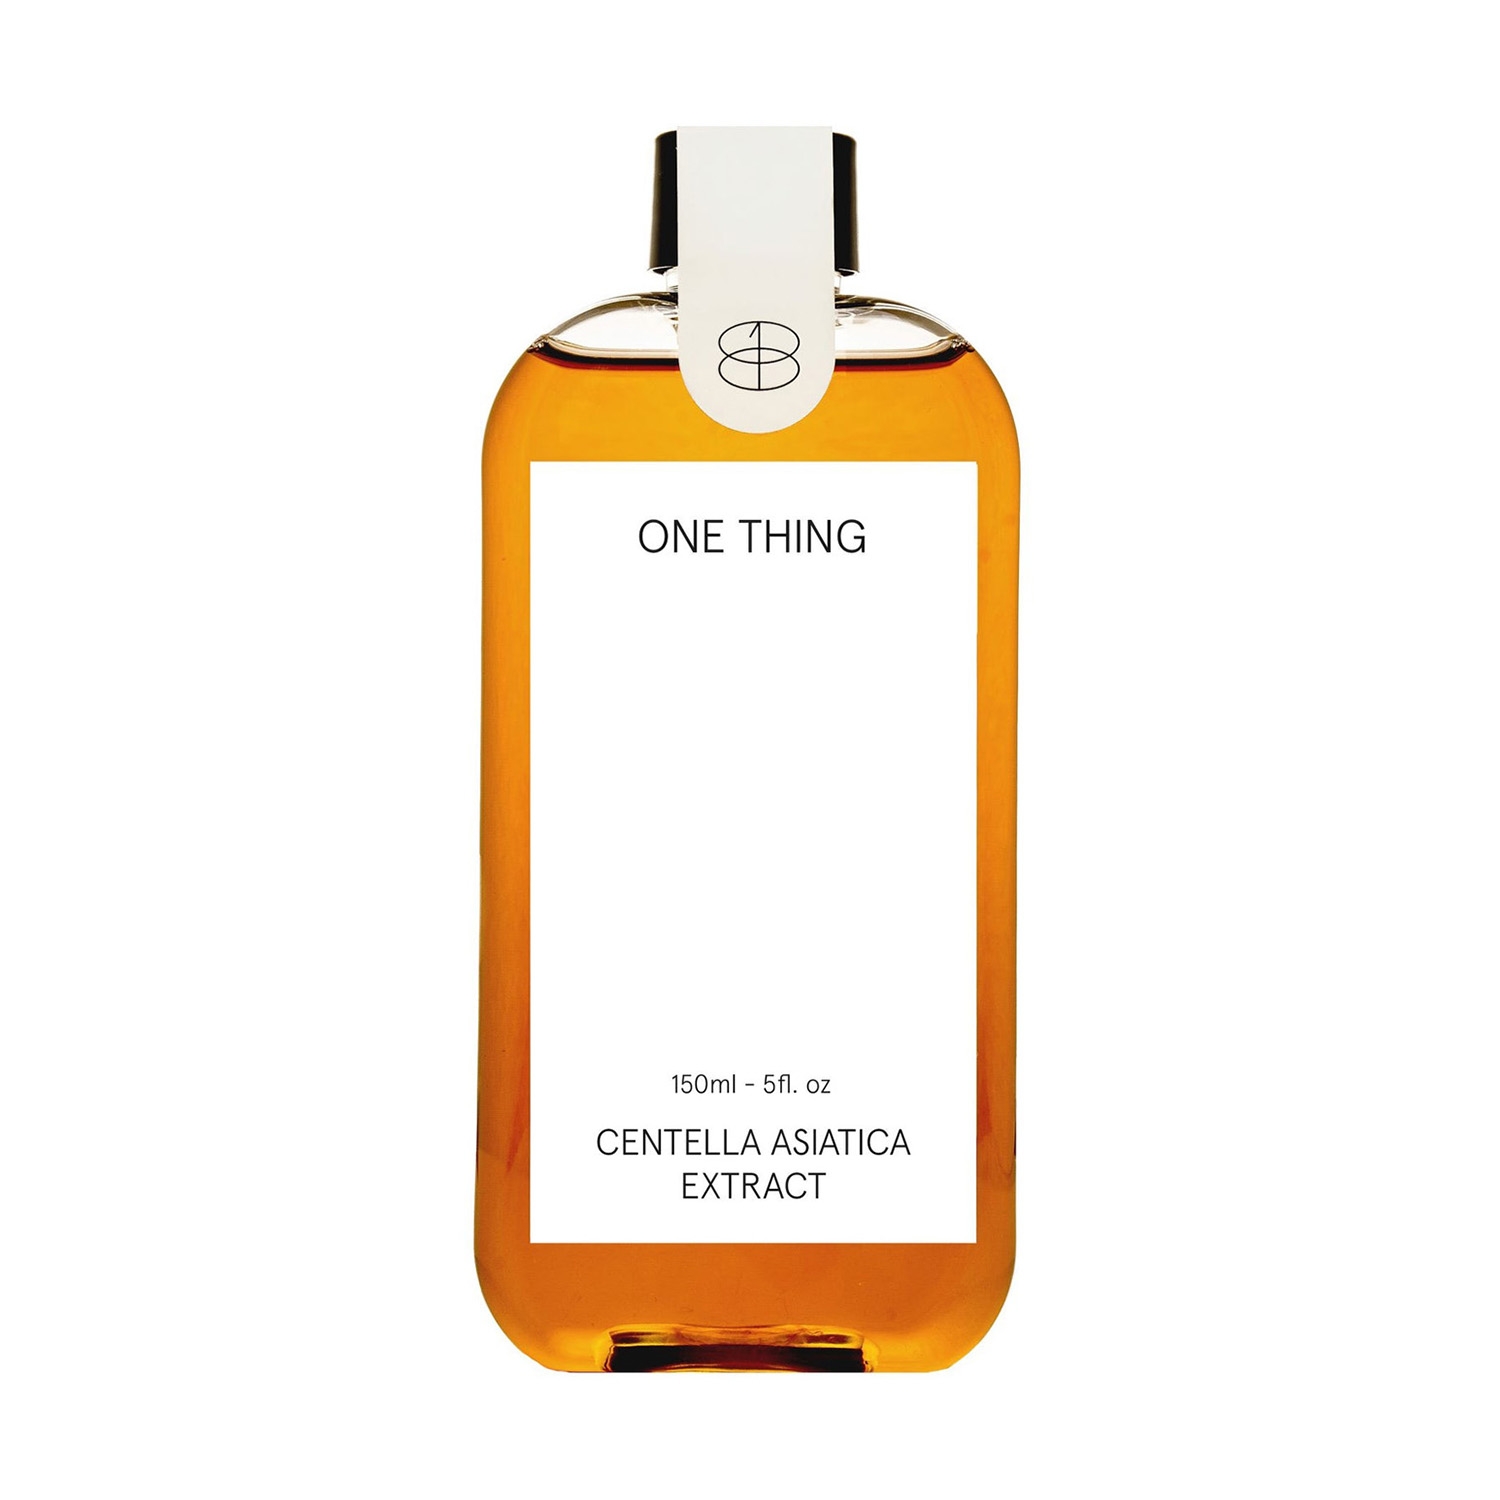 ONE THING | ONE THING Centella Asiatica Extract (150ml)